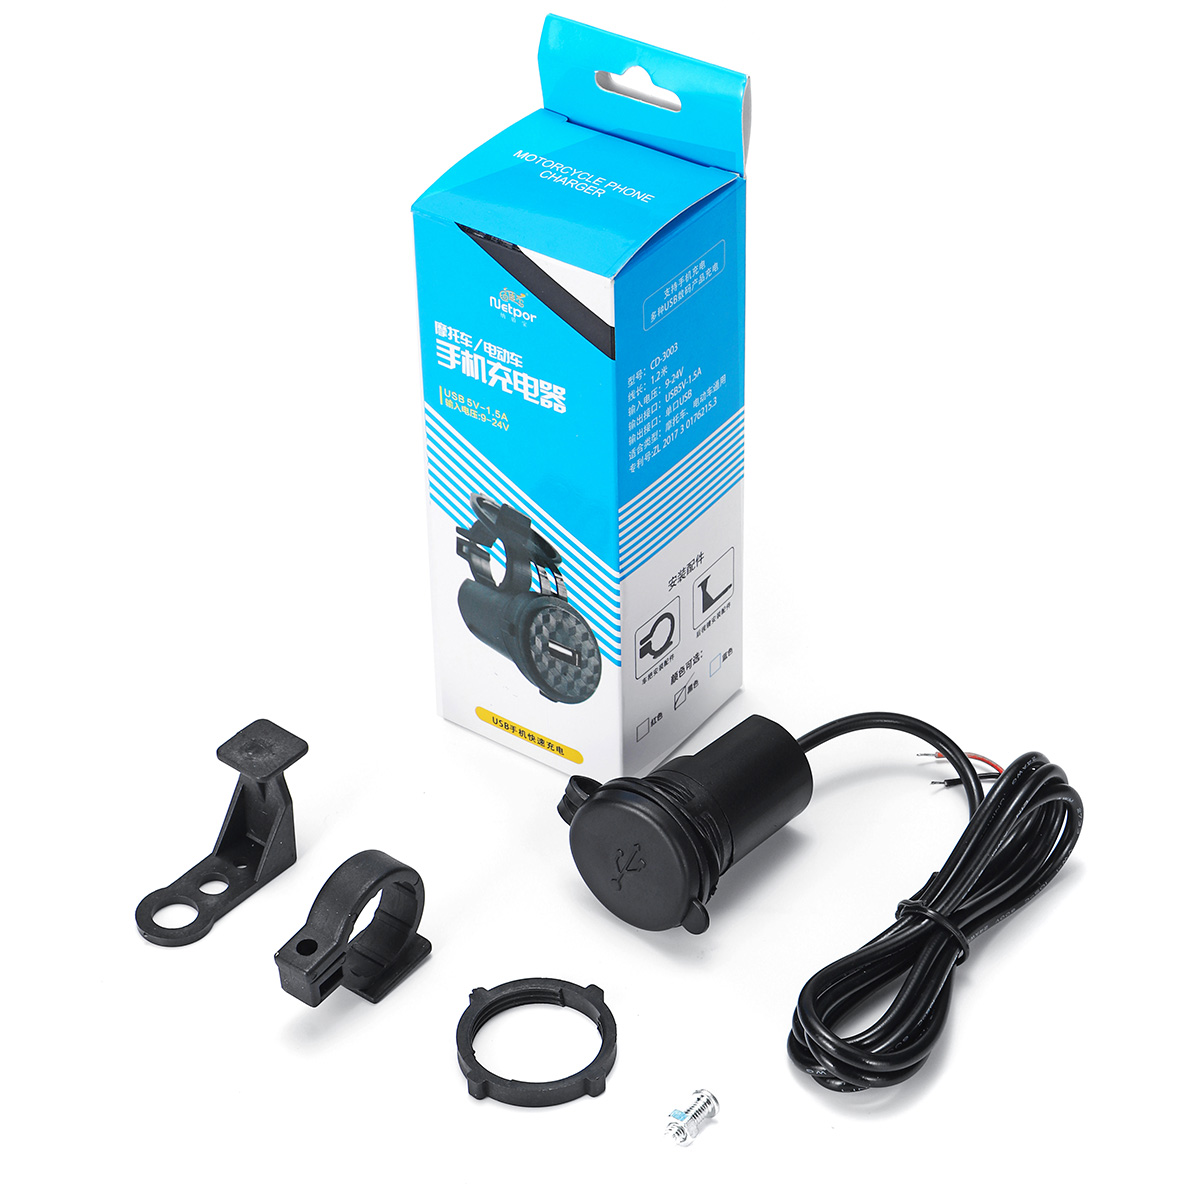 Waterproof 9-24V Motorcycle Mobile Phone USB Charger 2.1A Power Adapter Socket